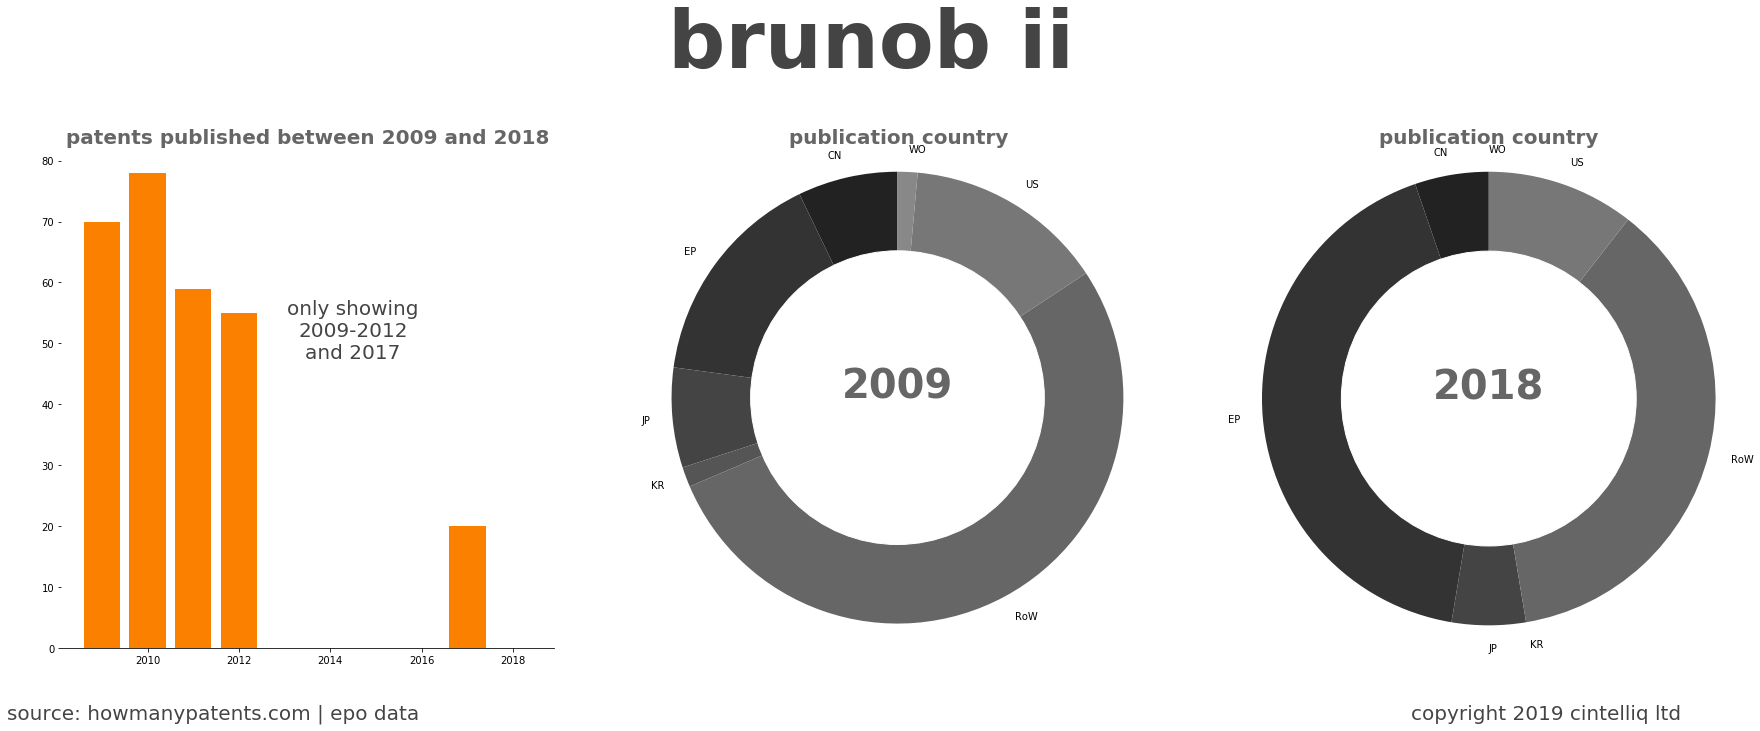 summary of patents for Brunob Ii